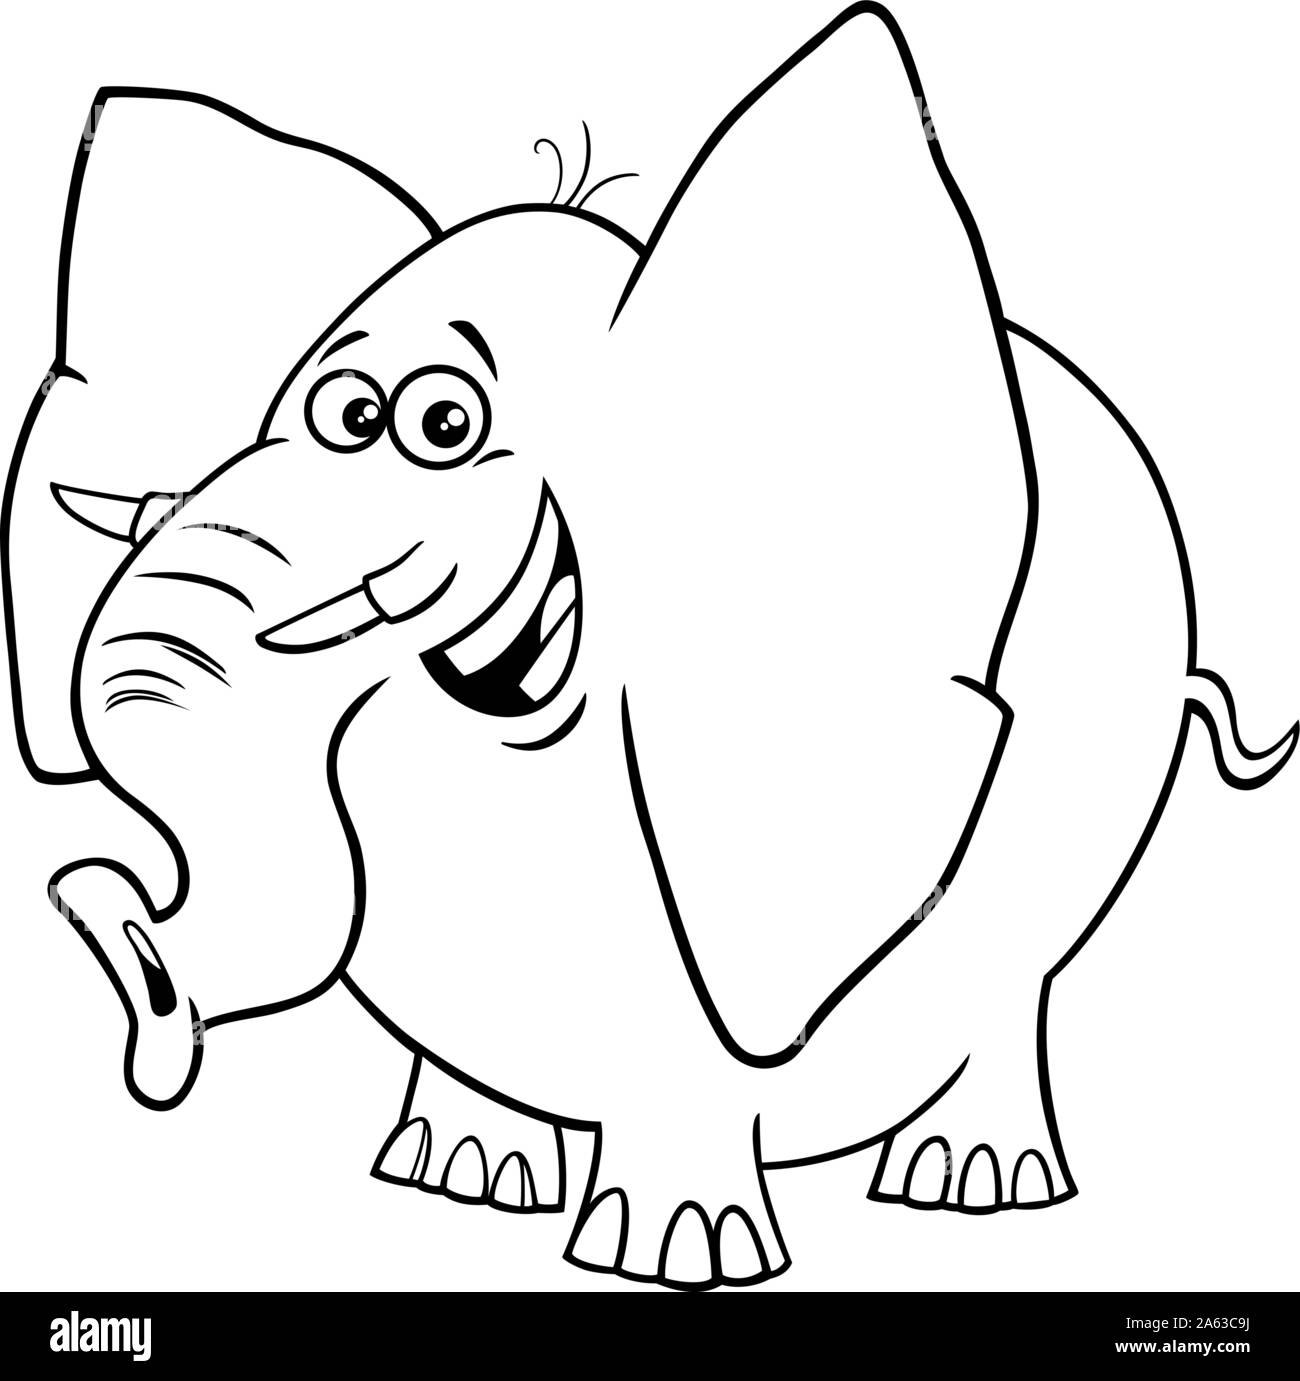 Black and White Cartoon Illustration of Funny African Elephant Comic ...